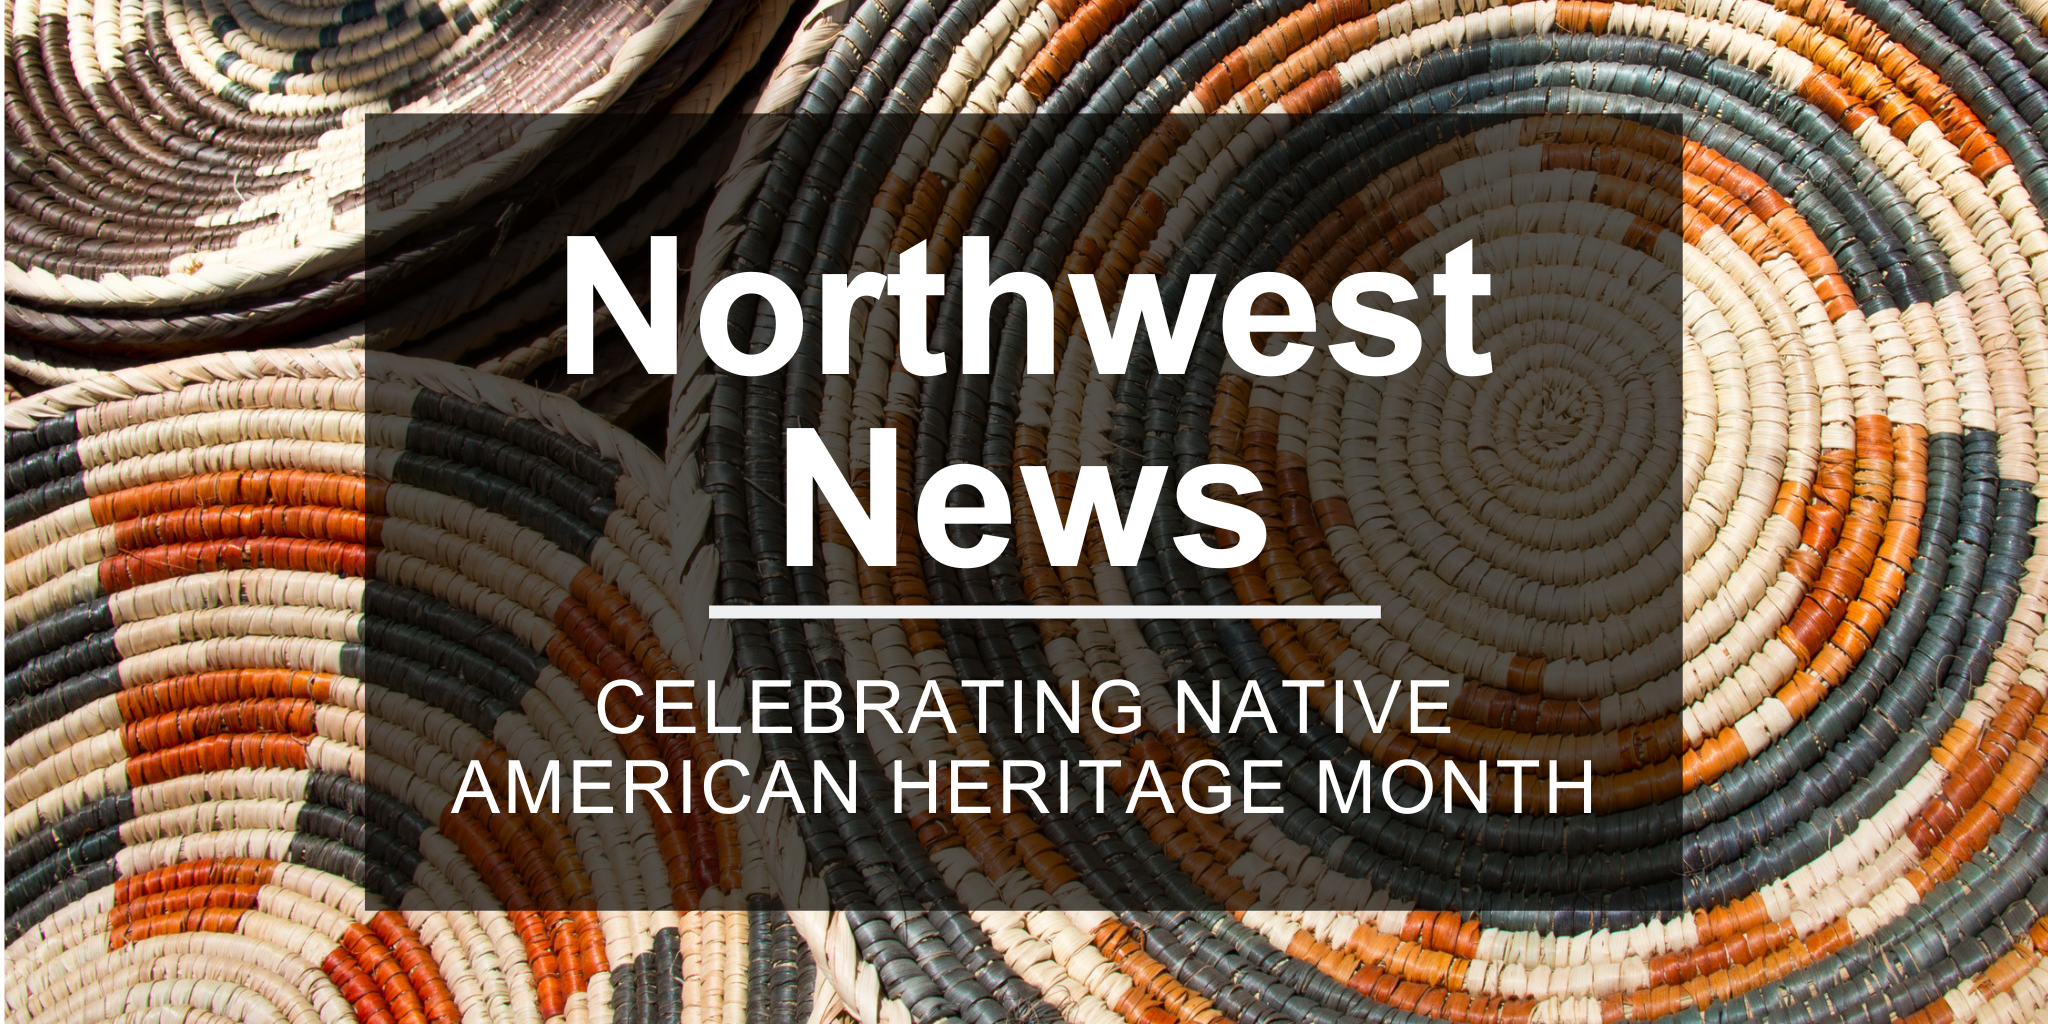 Image of woven baskets with the text Northwest News: Celebrating Native American Heritage Month